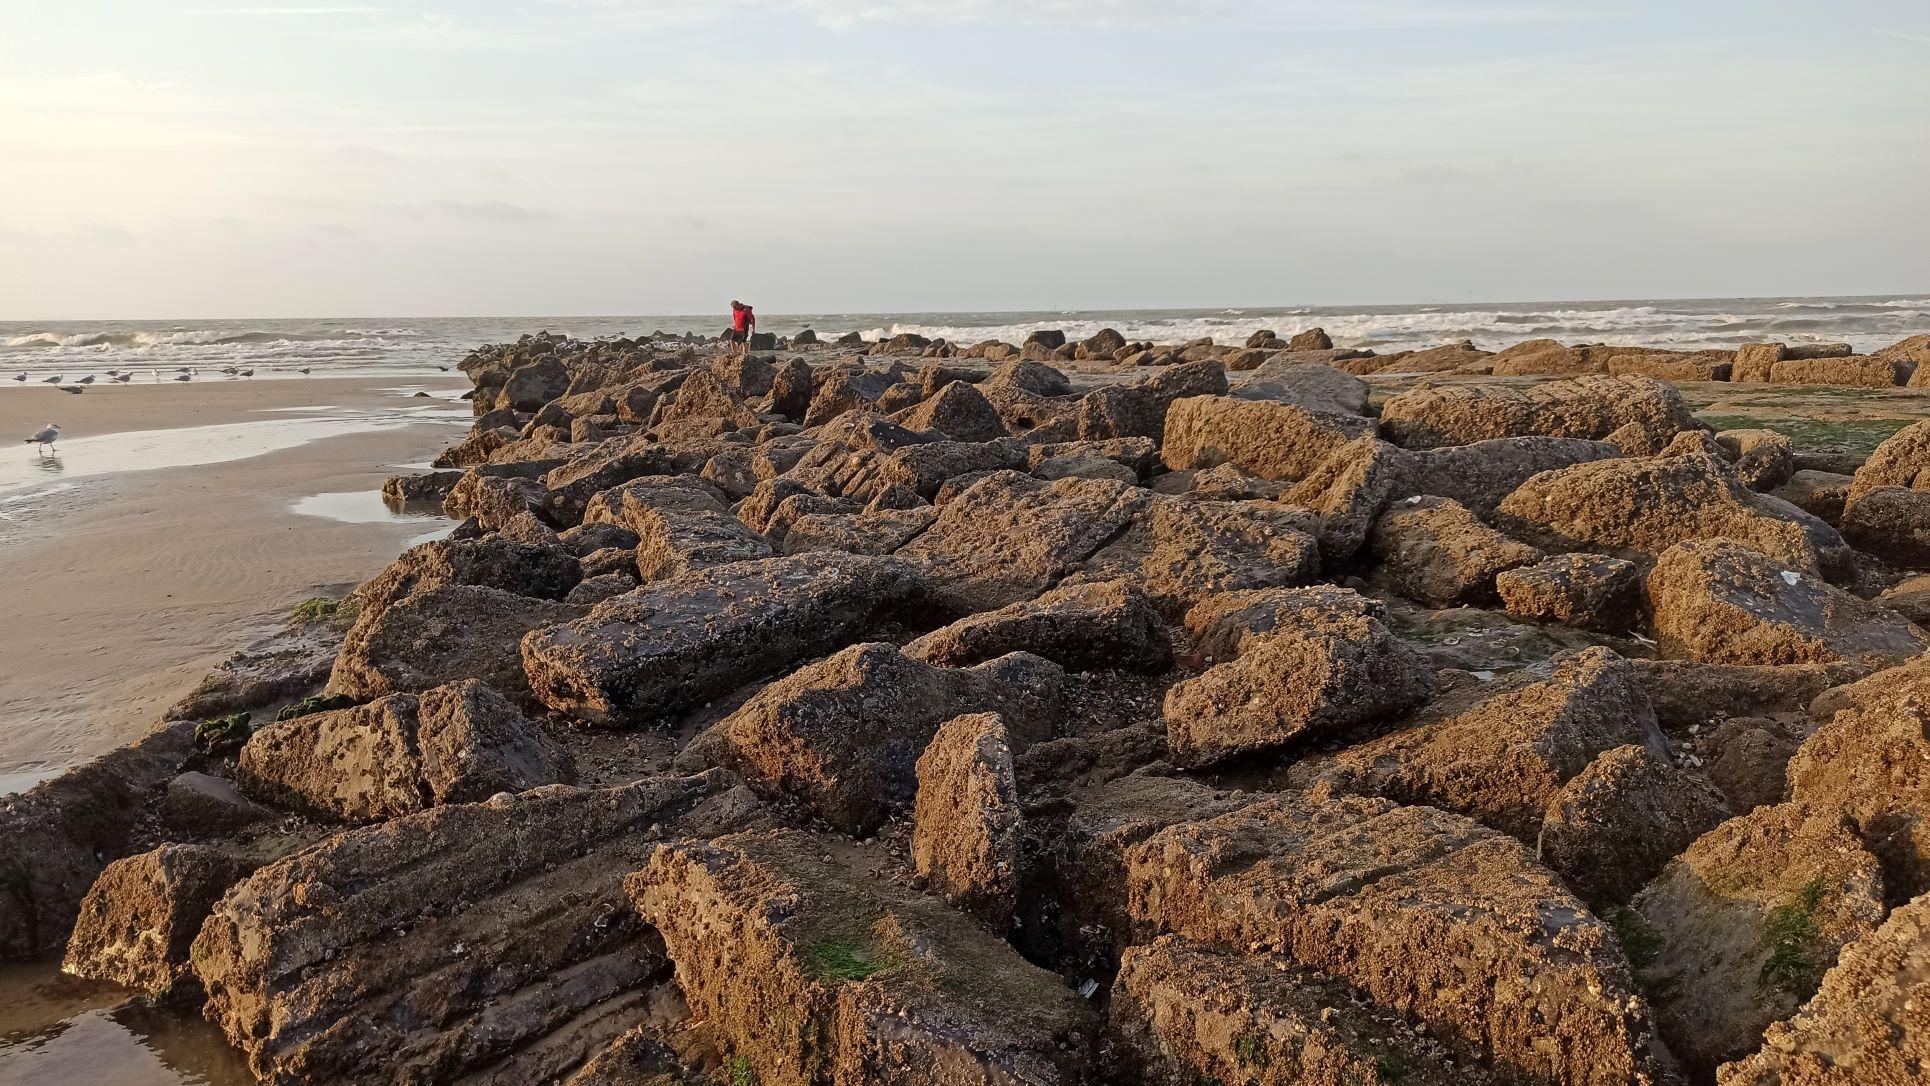 Photo of rocky shore with person in distance